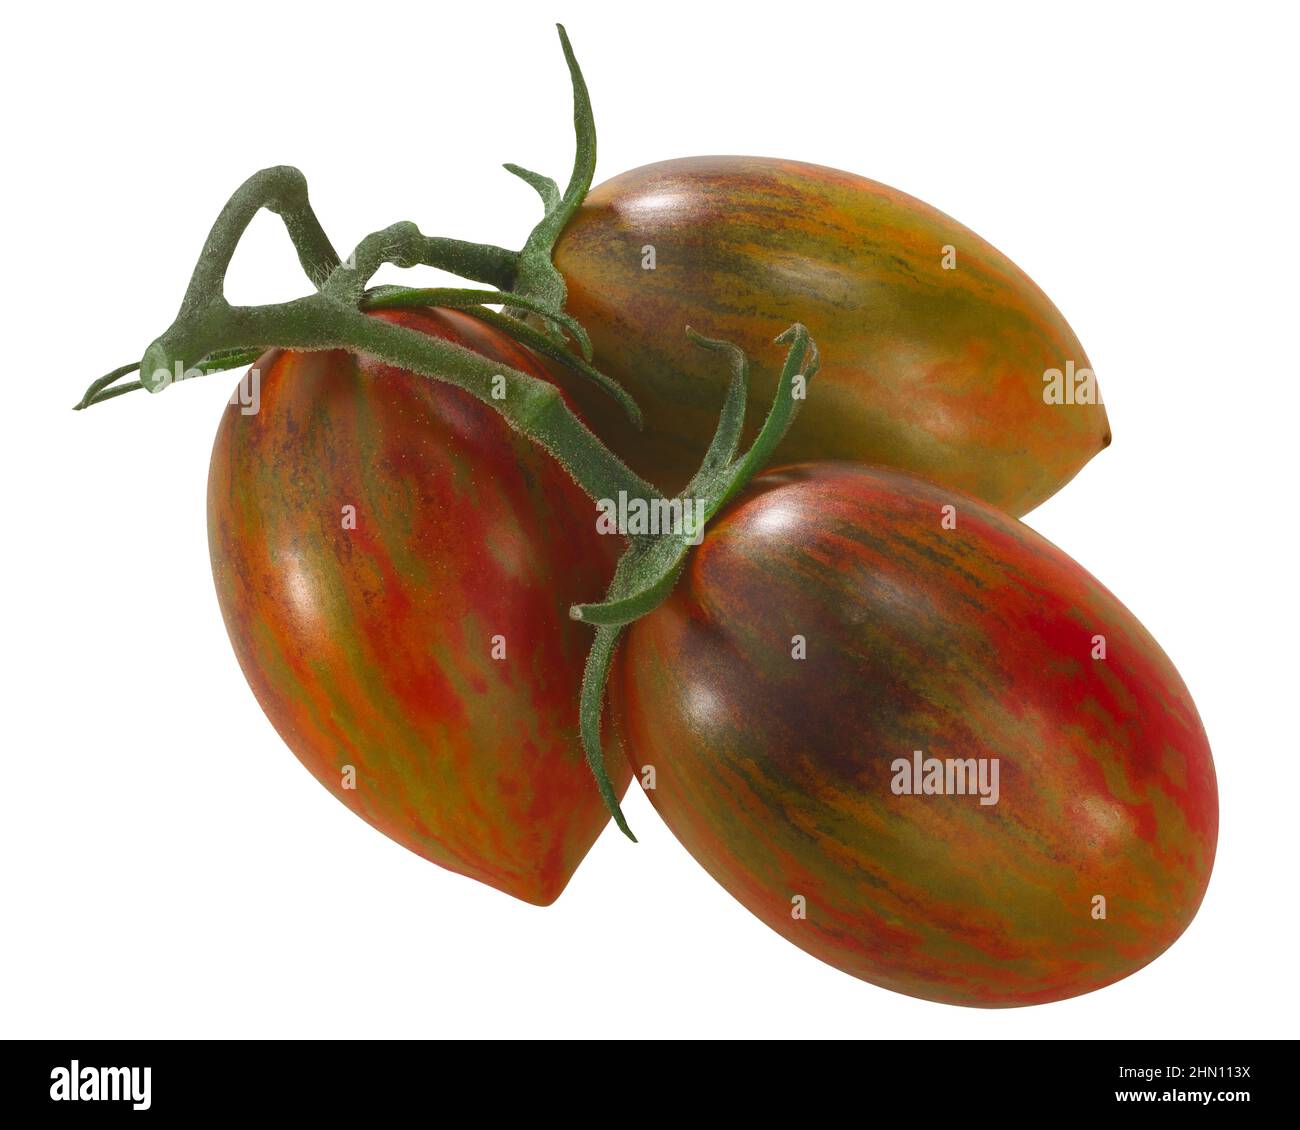 Brad's atomic grape heirloom tomatoes on the vine, cluster of, isolated (Solanum lycopersicum fruits) Stock Photo